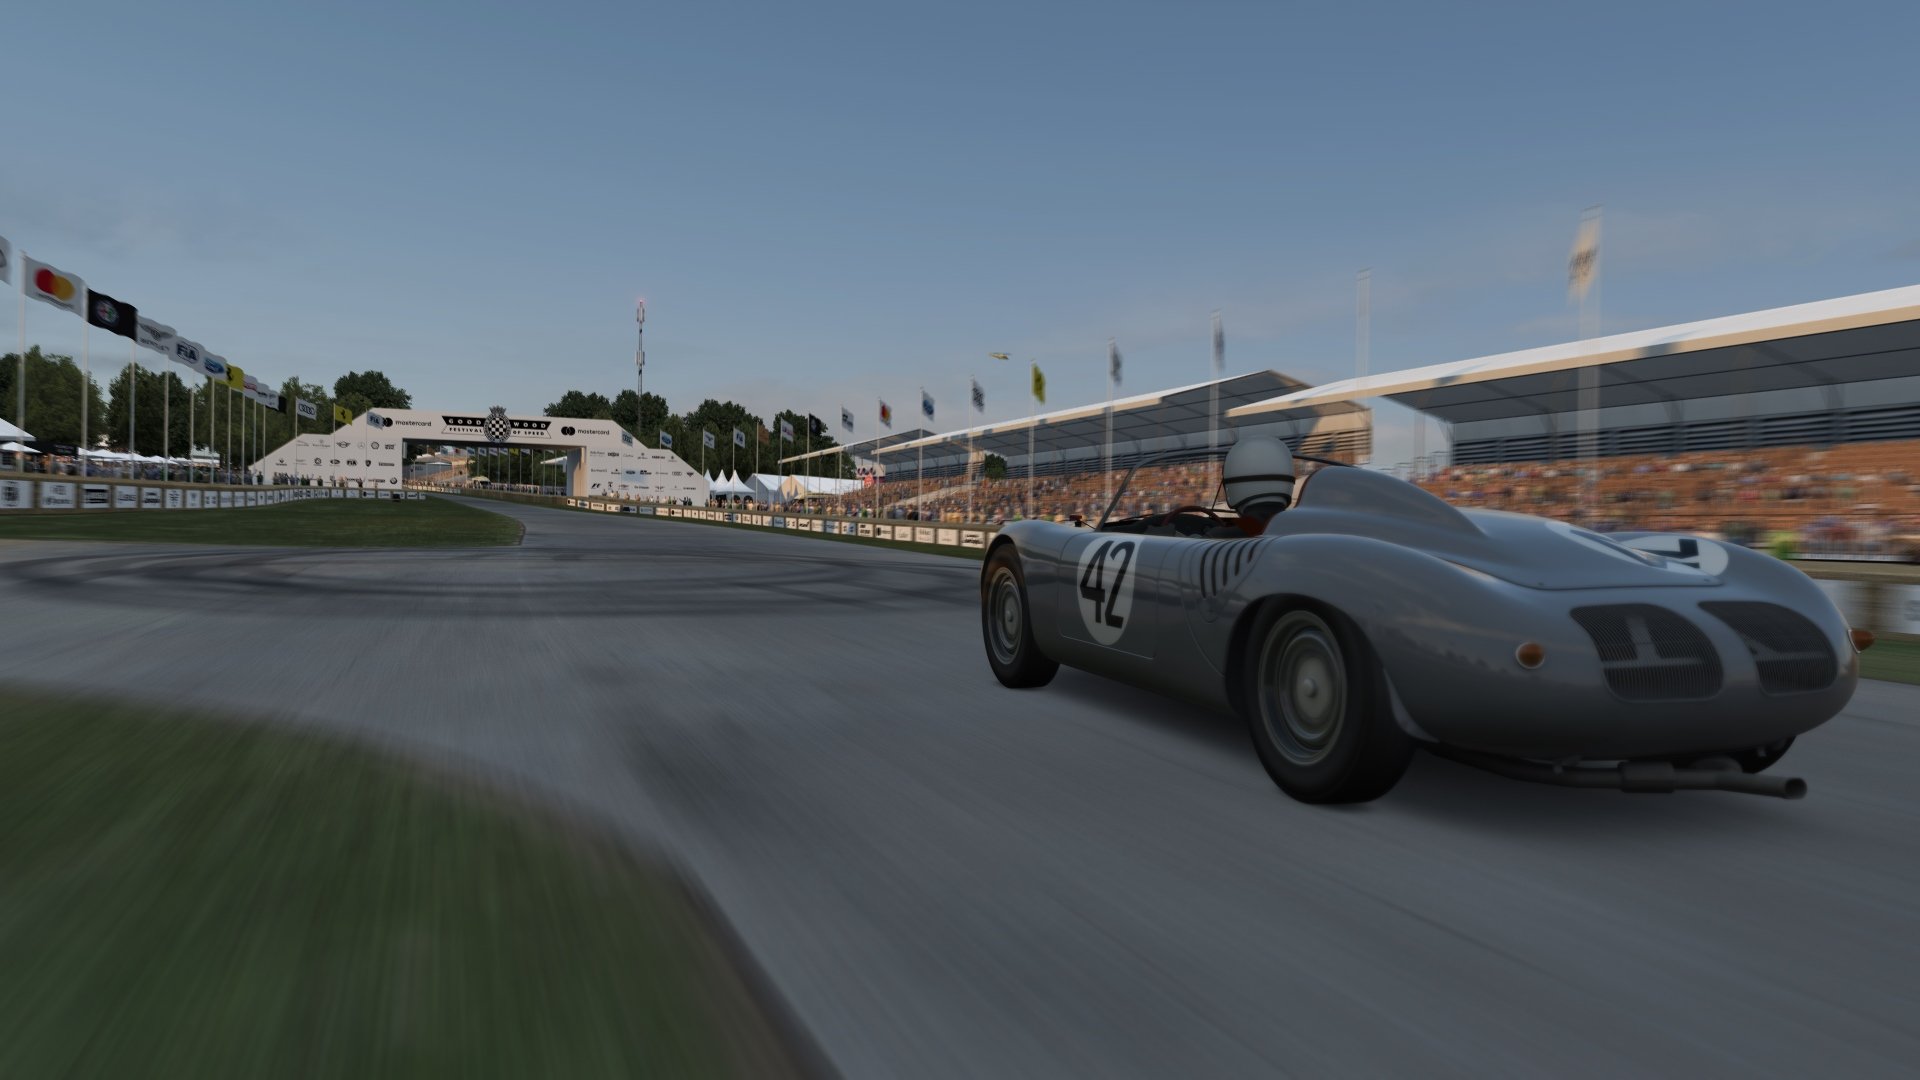 More information about "In pista al Goodwood Festival of Speed con Assetto Corsa ed rFactor 2"